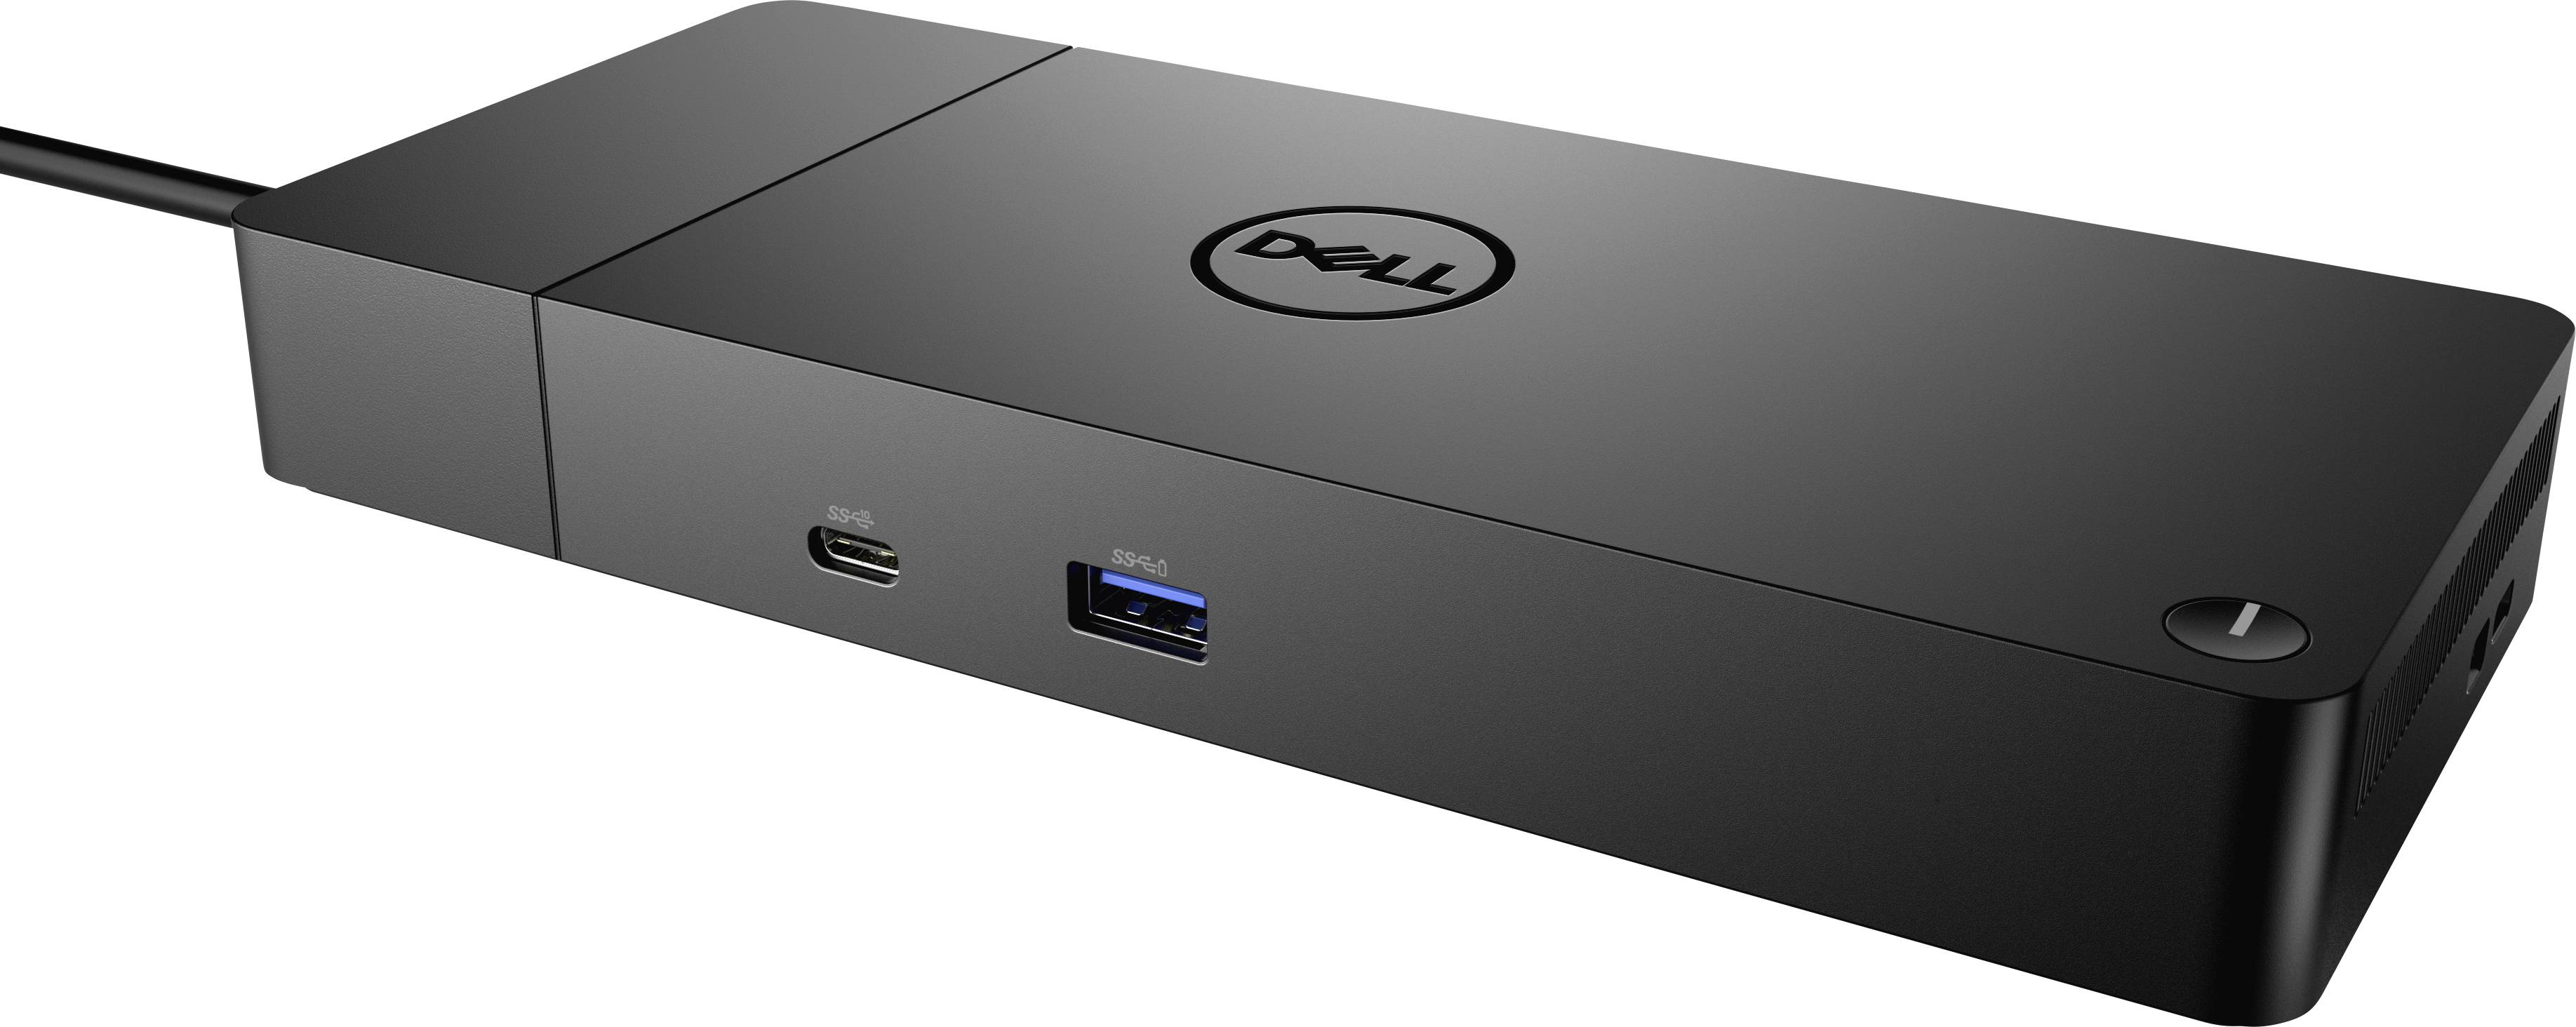 How To Update Dell Docking Station | CellularNews